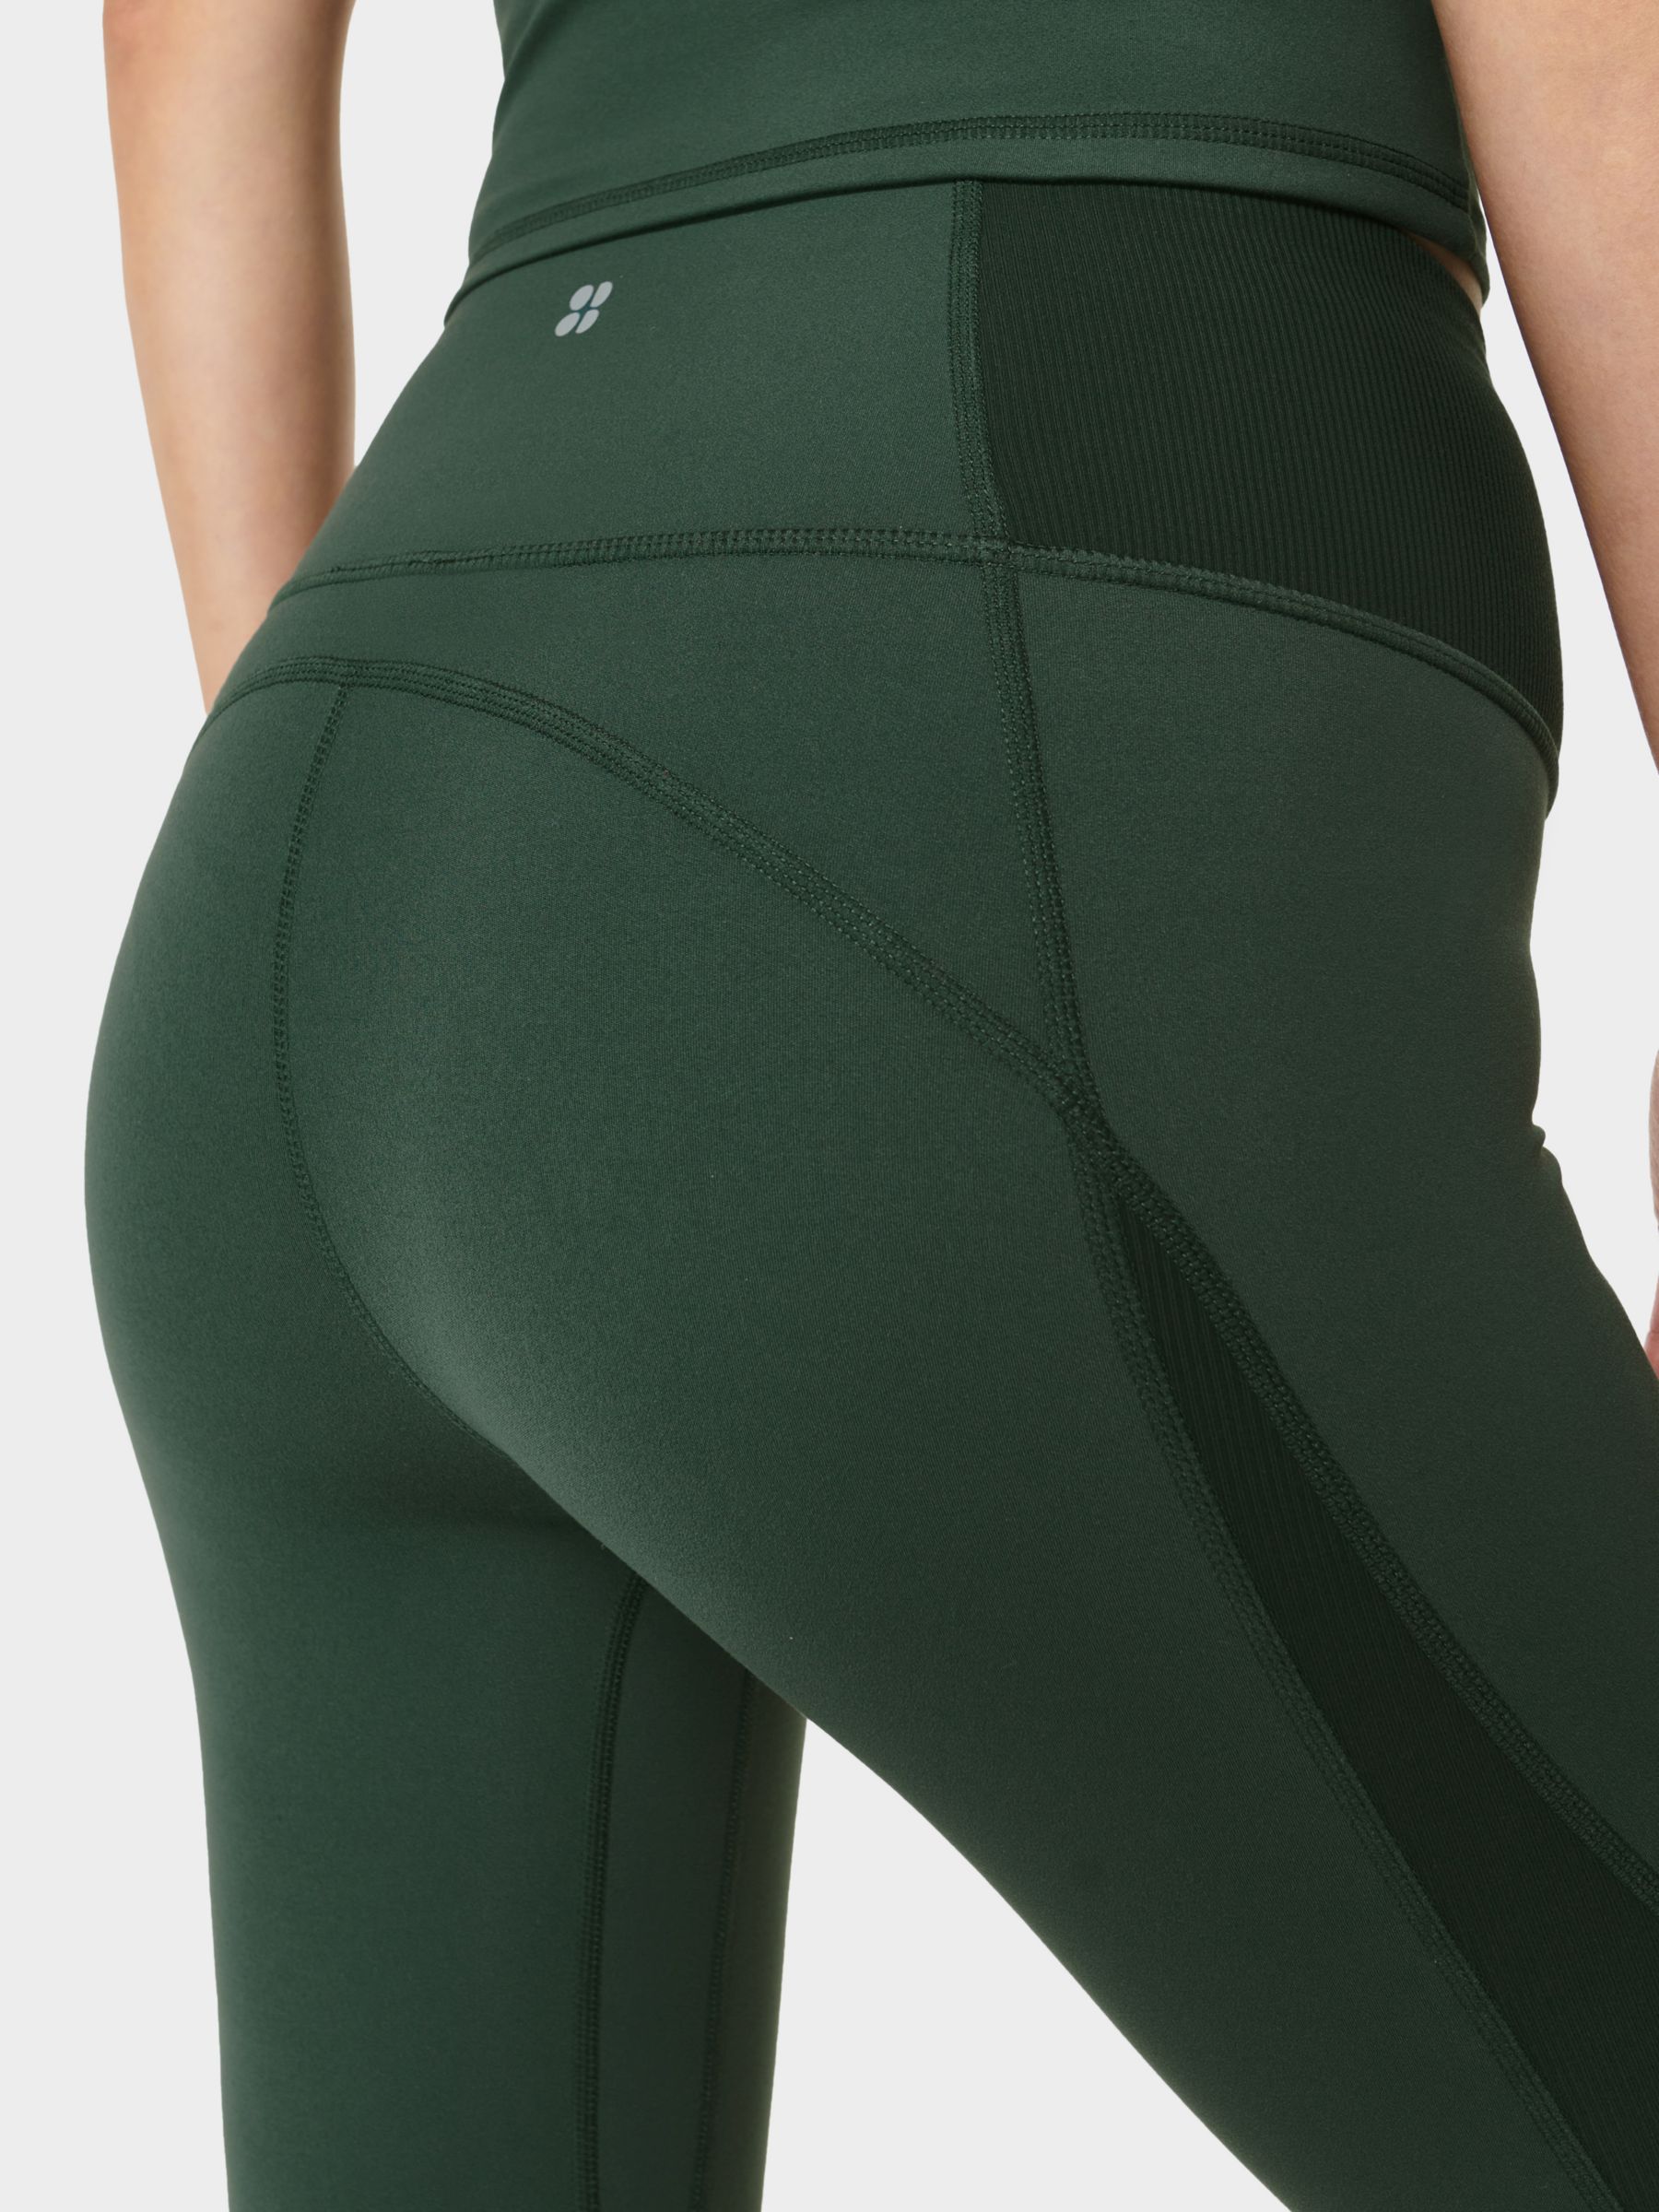 Which Sweaty Betty Leggings Are Squat Proofreading